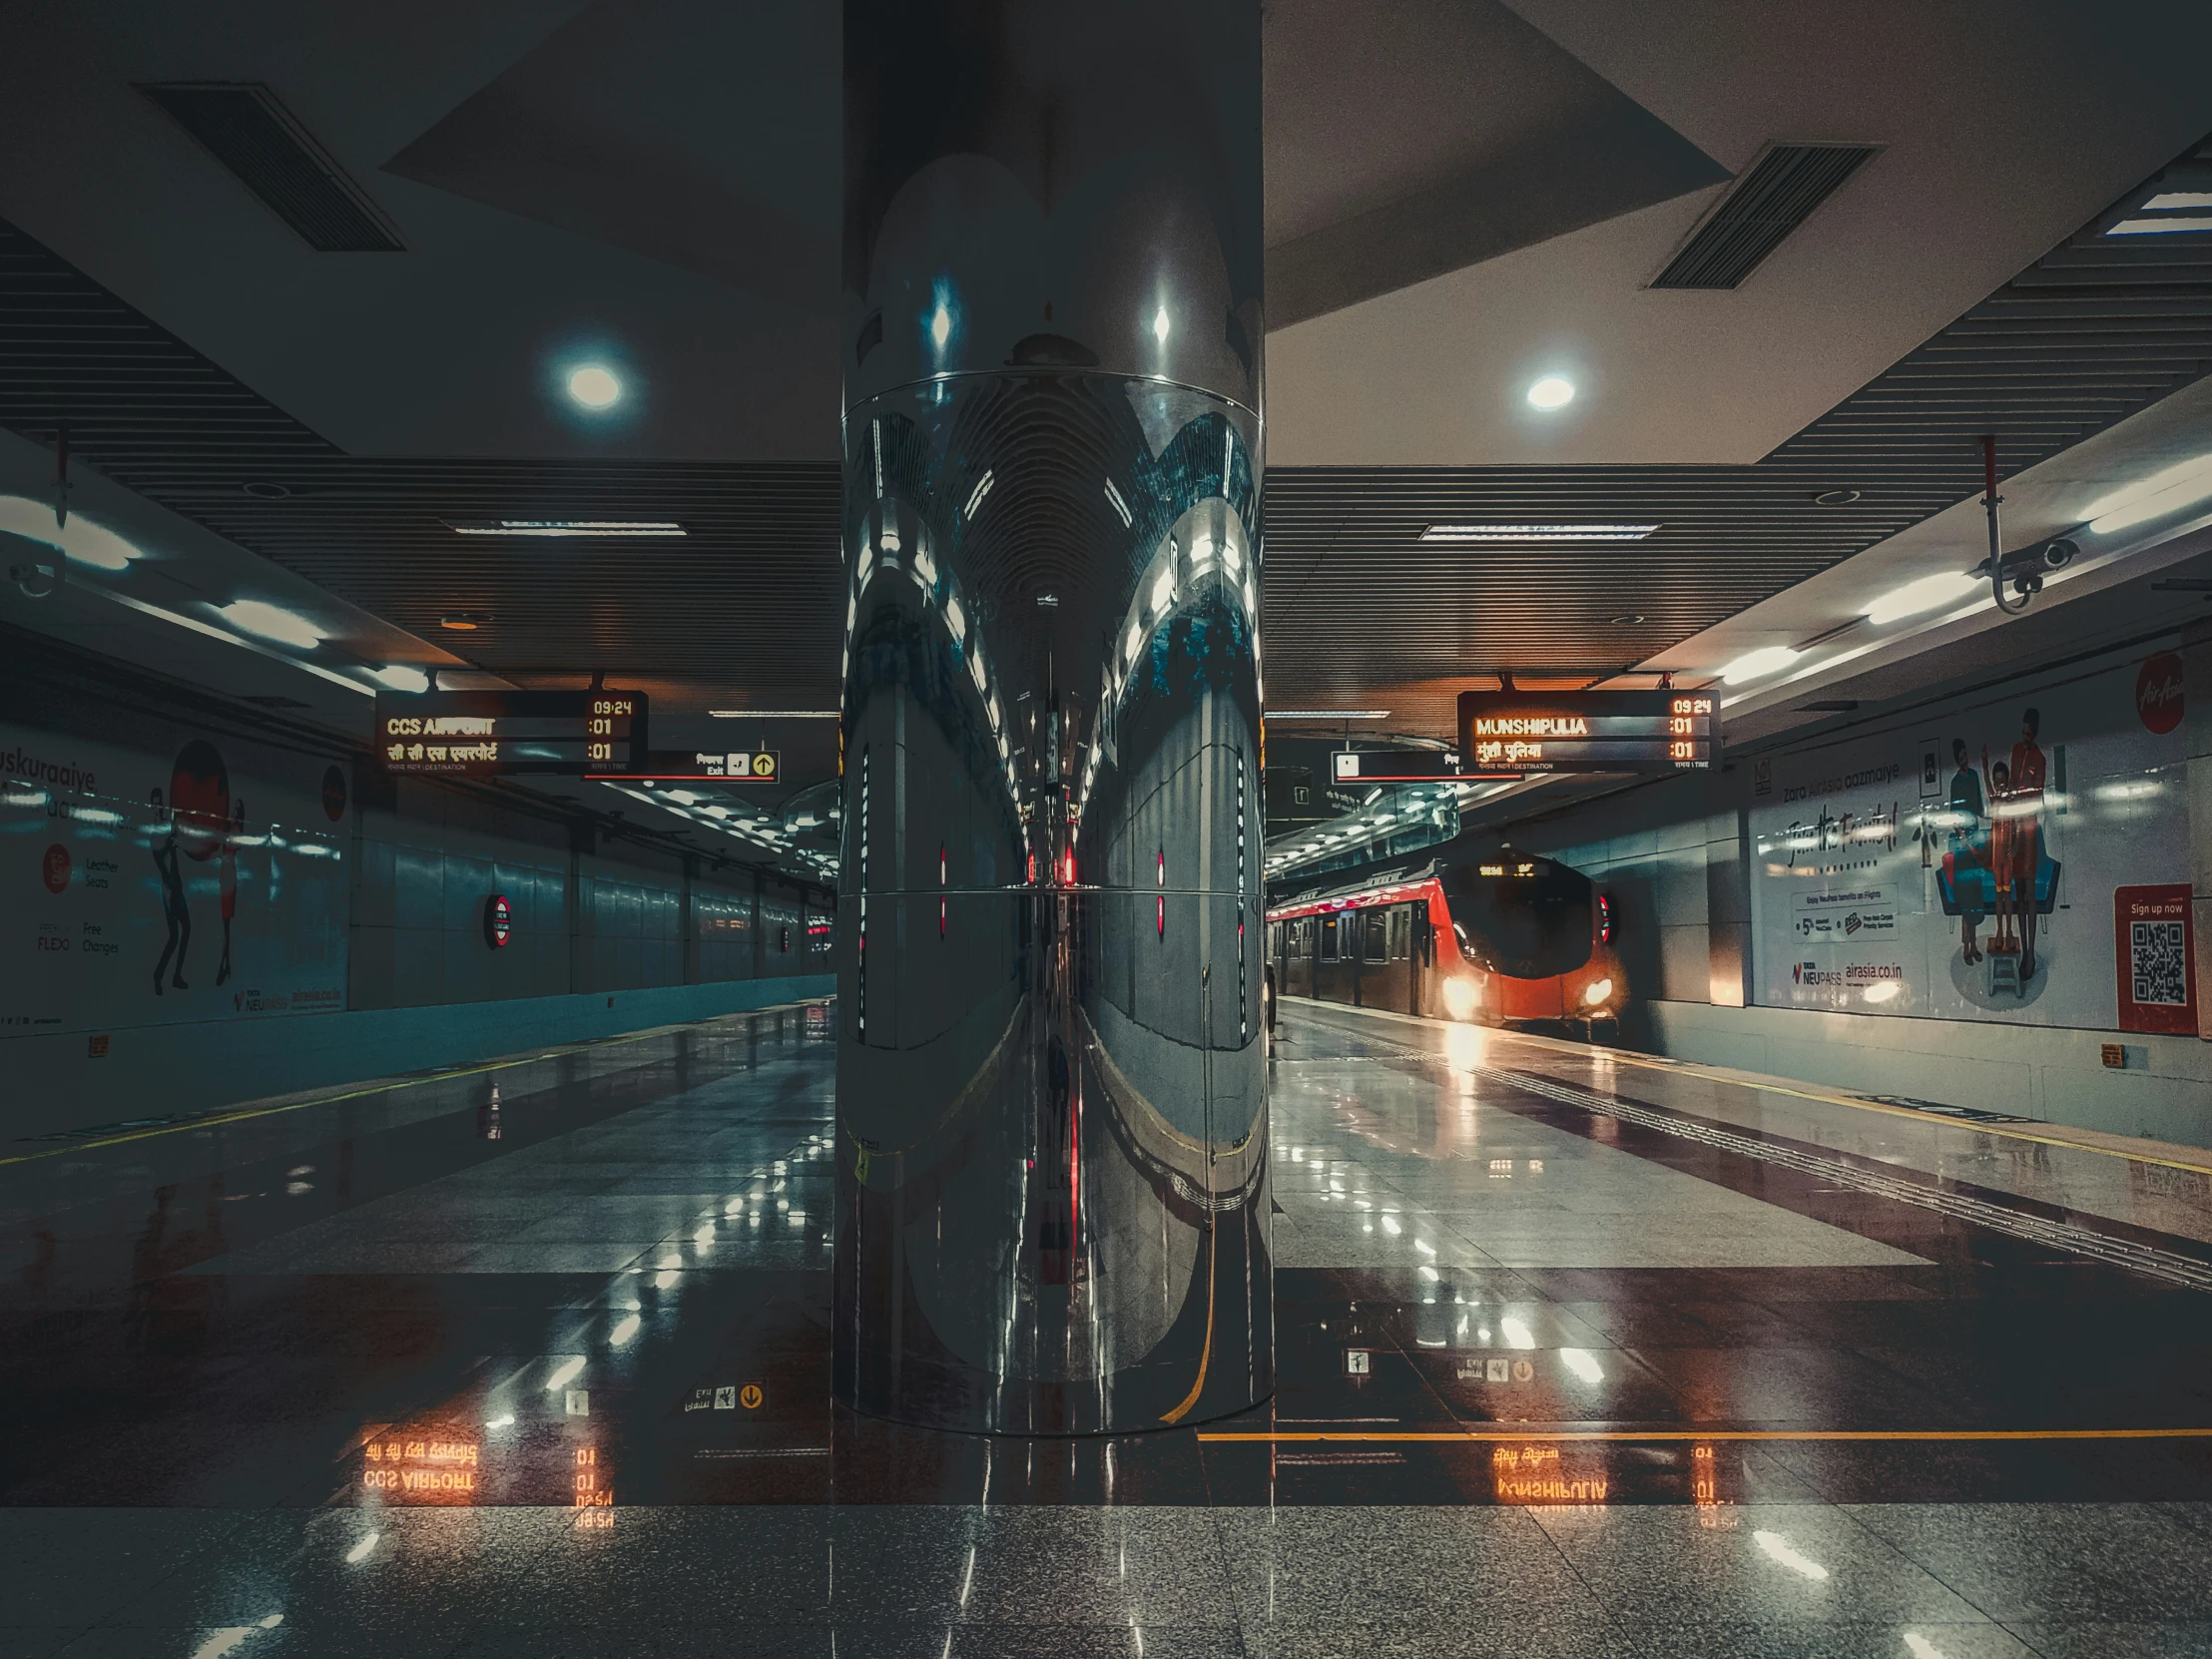 a reflection of a train is shown on the ground